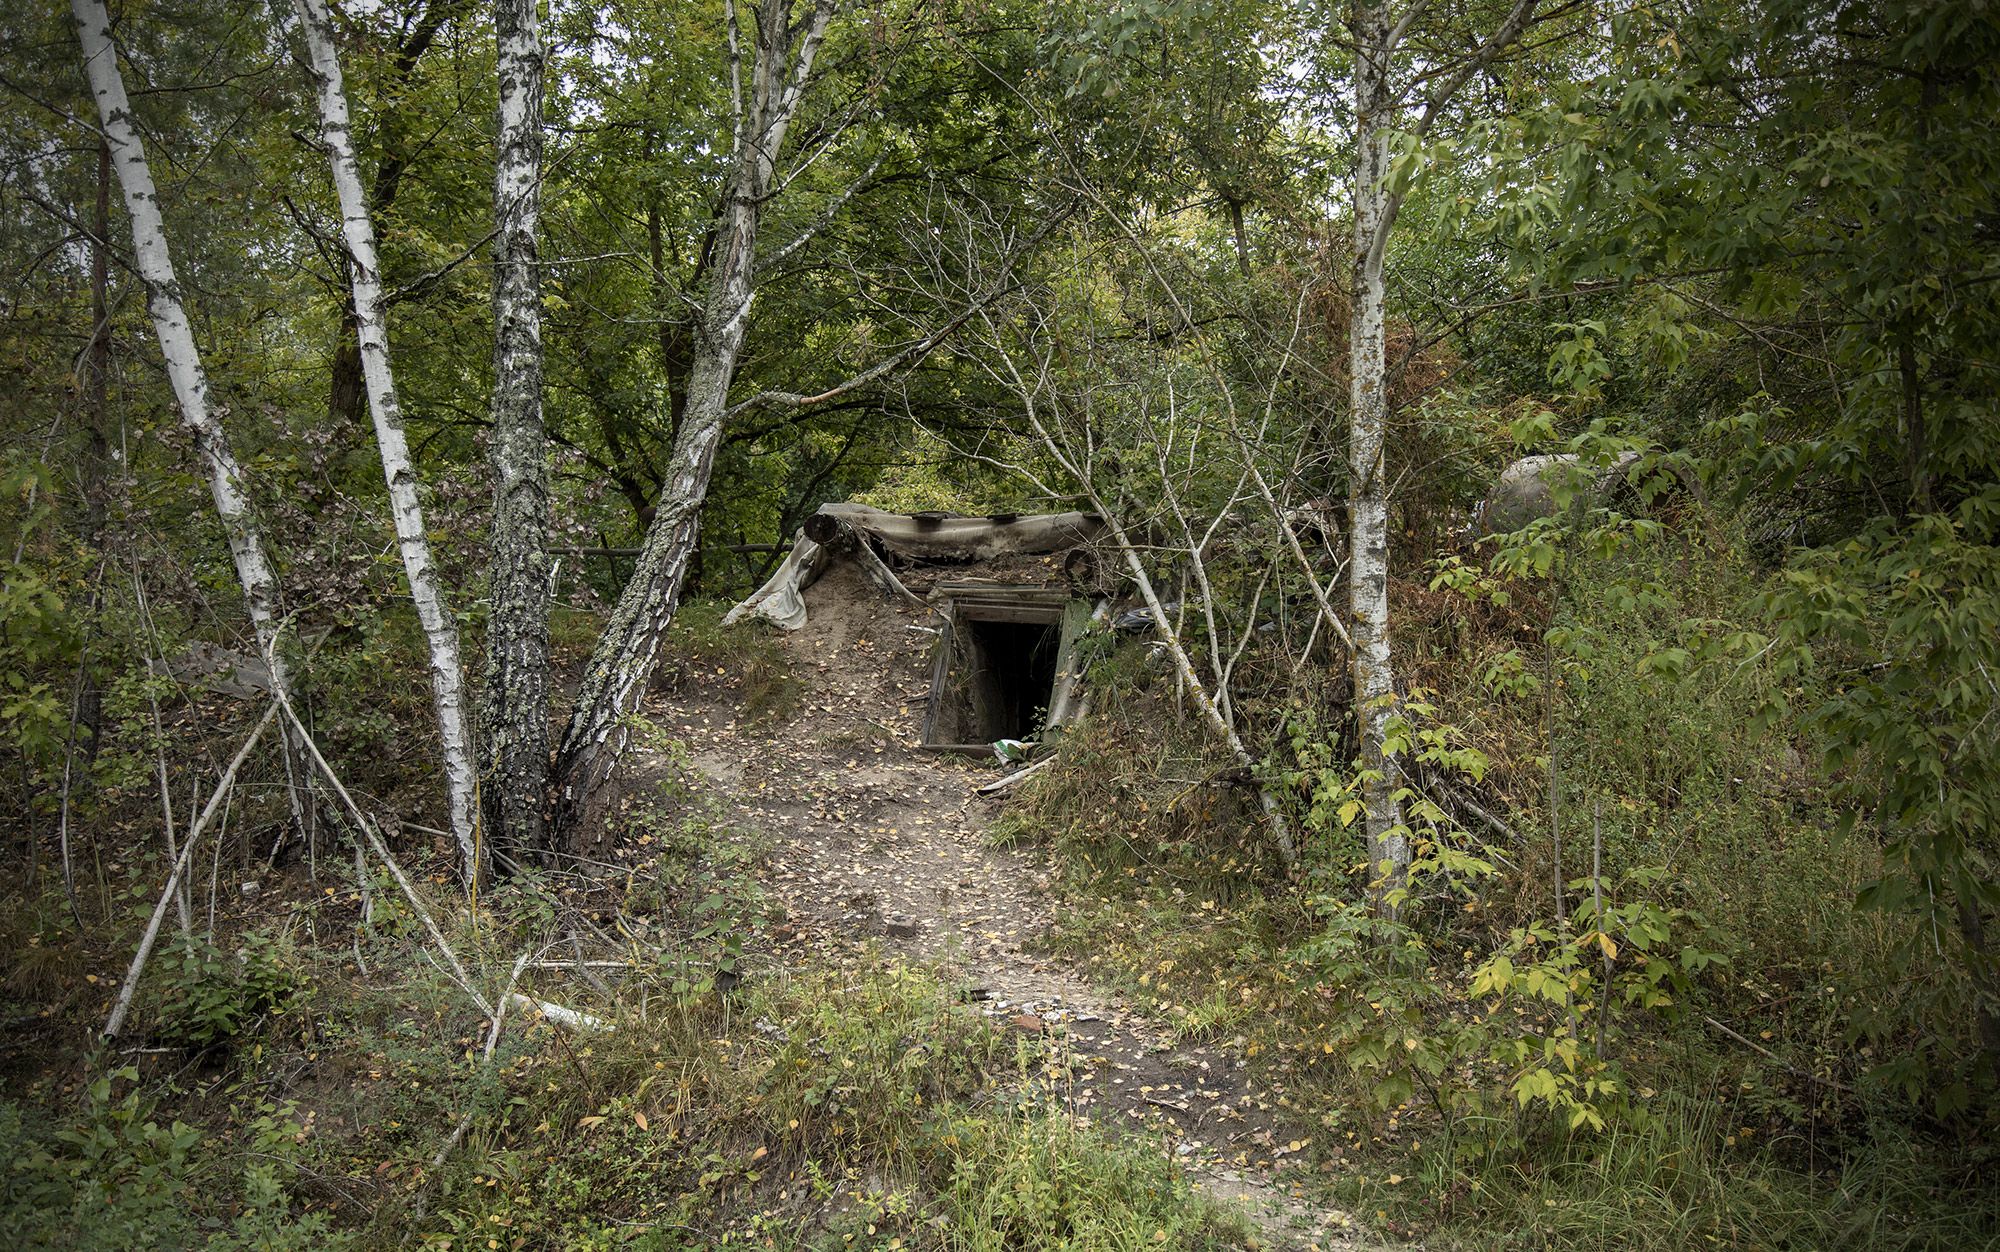 Trenches in Chernobyl | Aeon